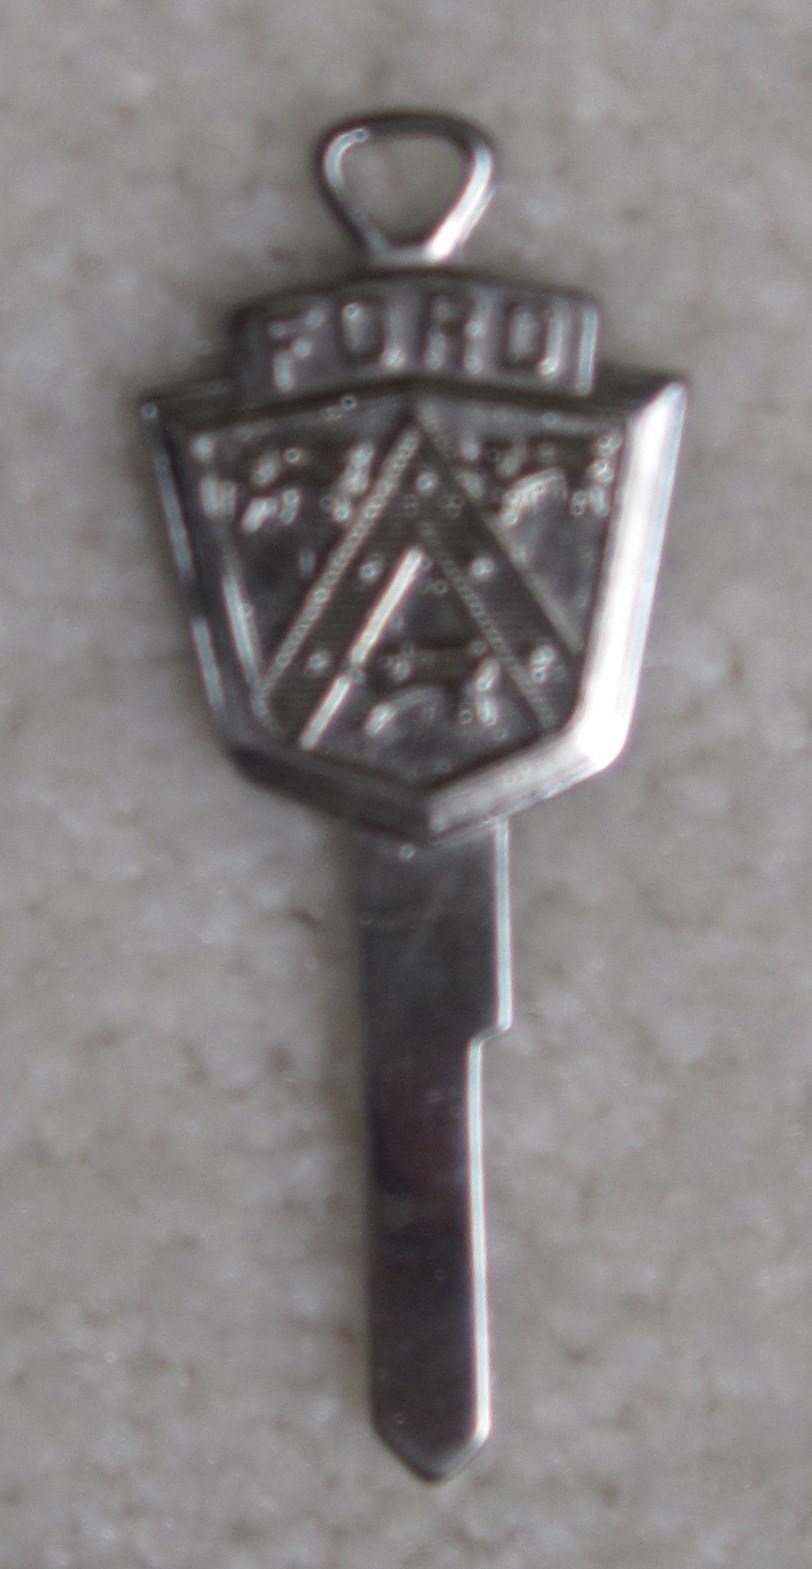 Ford Crest Key - 1951 and 1952